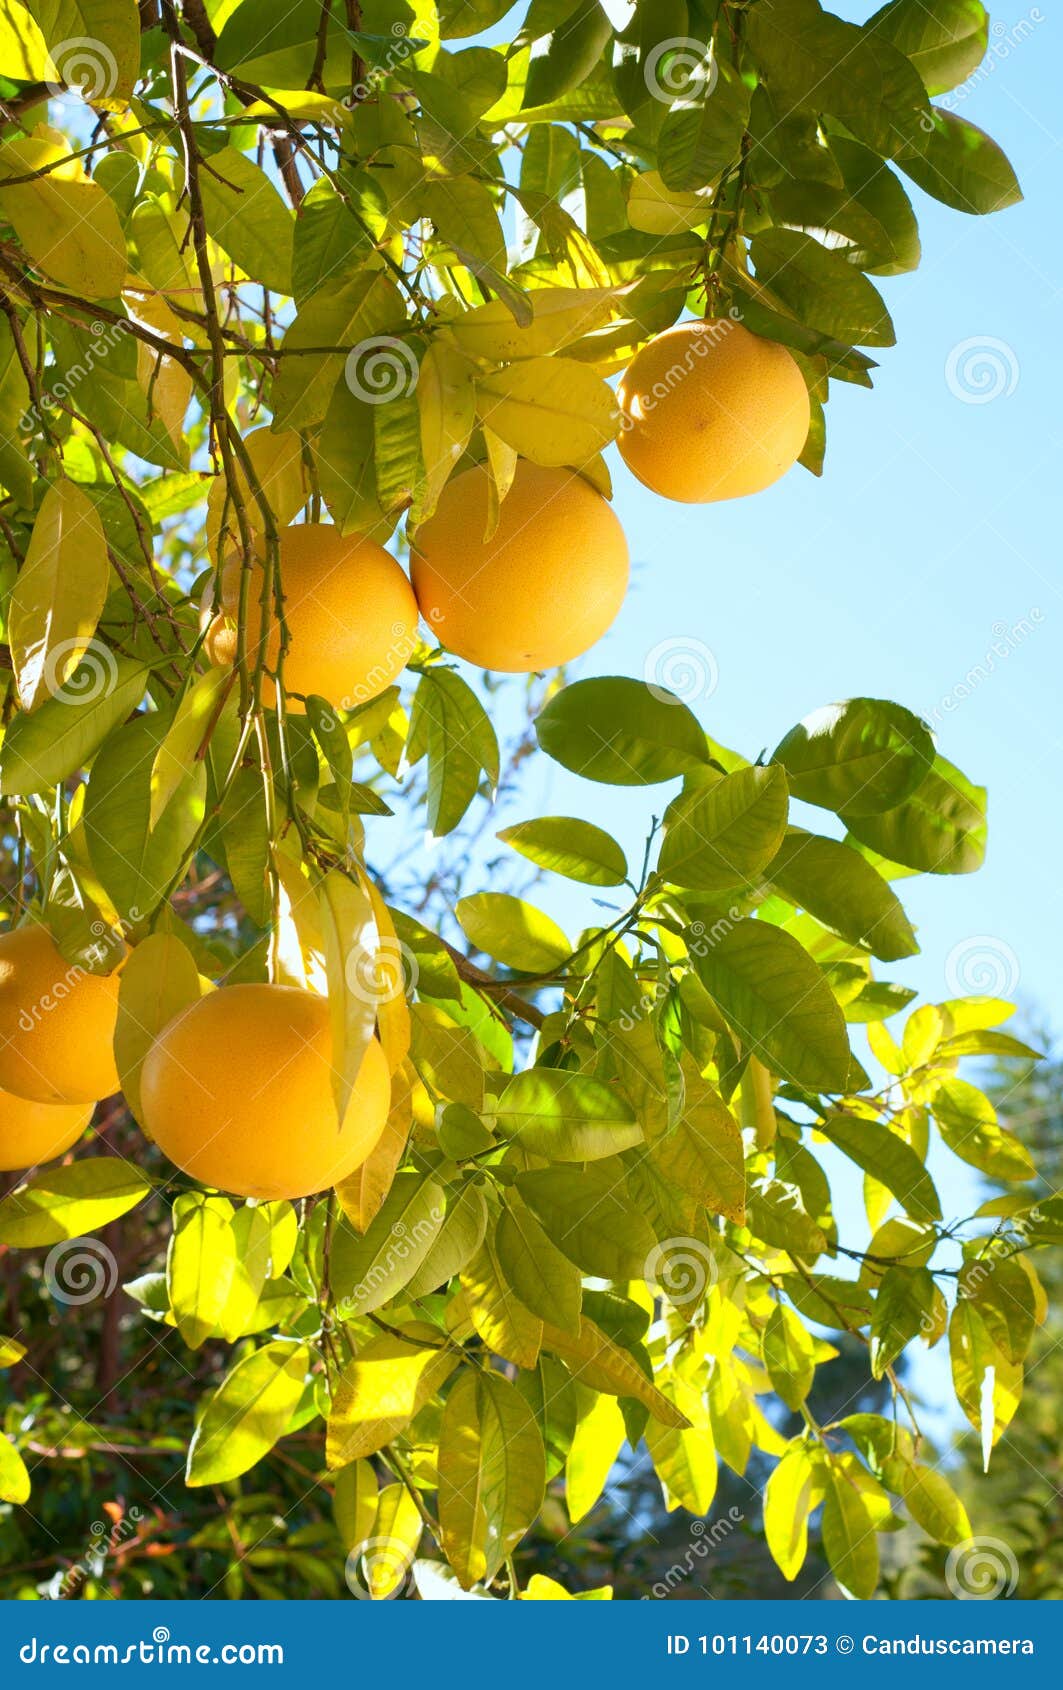 grapefruit growing organic in southern california back yard in winter time with sunny day, blue sky background with room or space